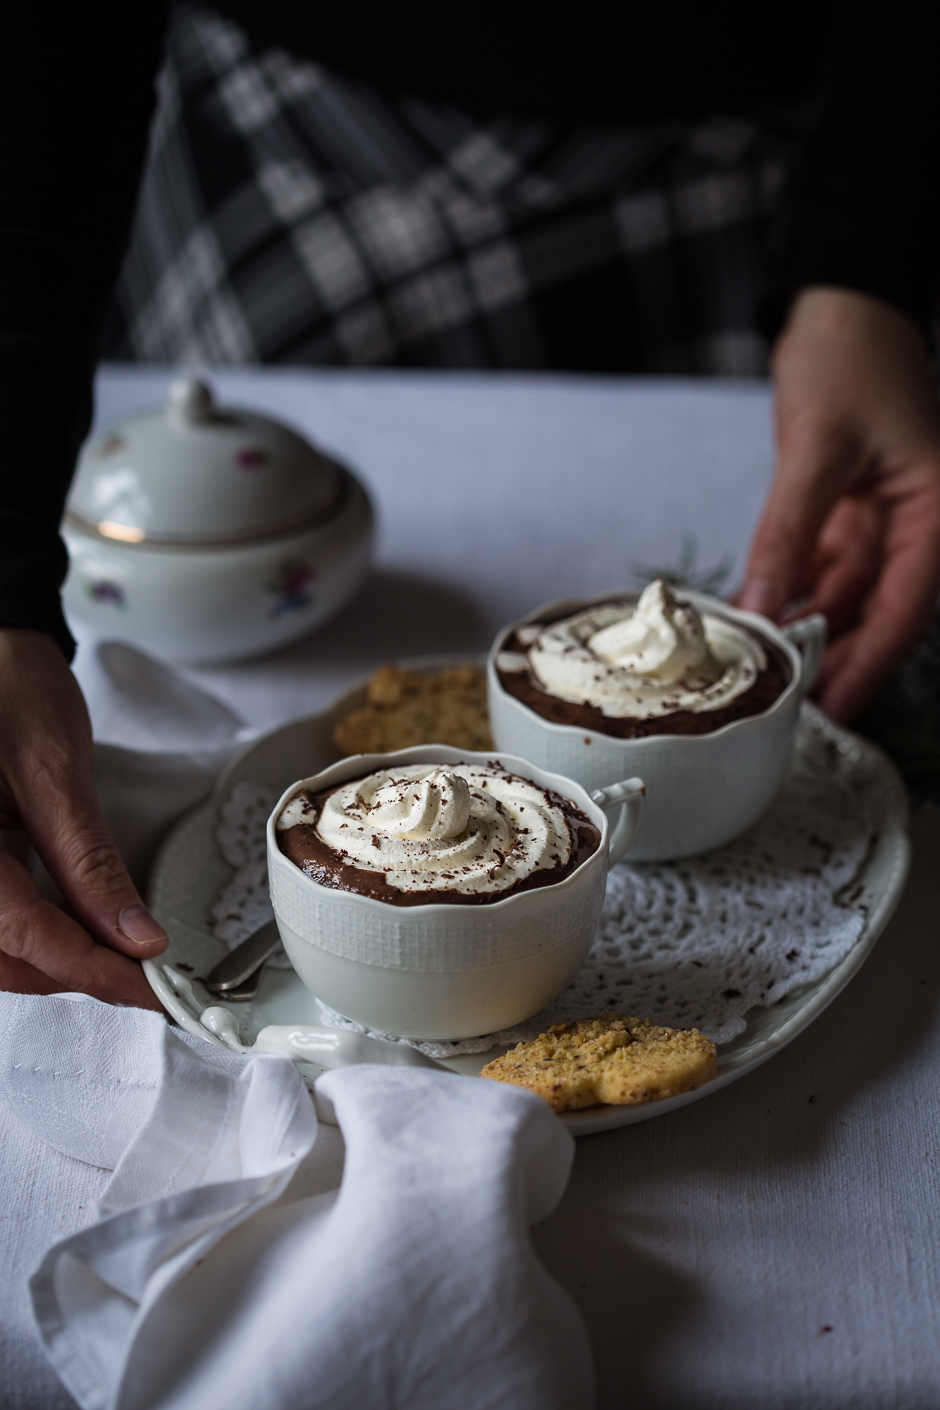 hot chocolate from the Taste of Memories Hungarian country kitchen www.tasteofmemories.com